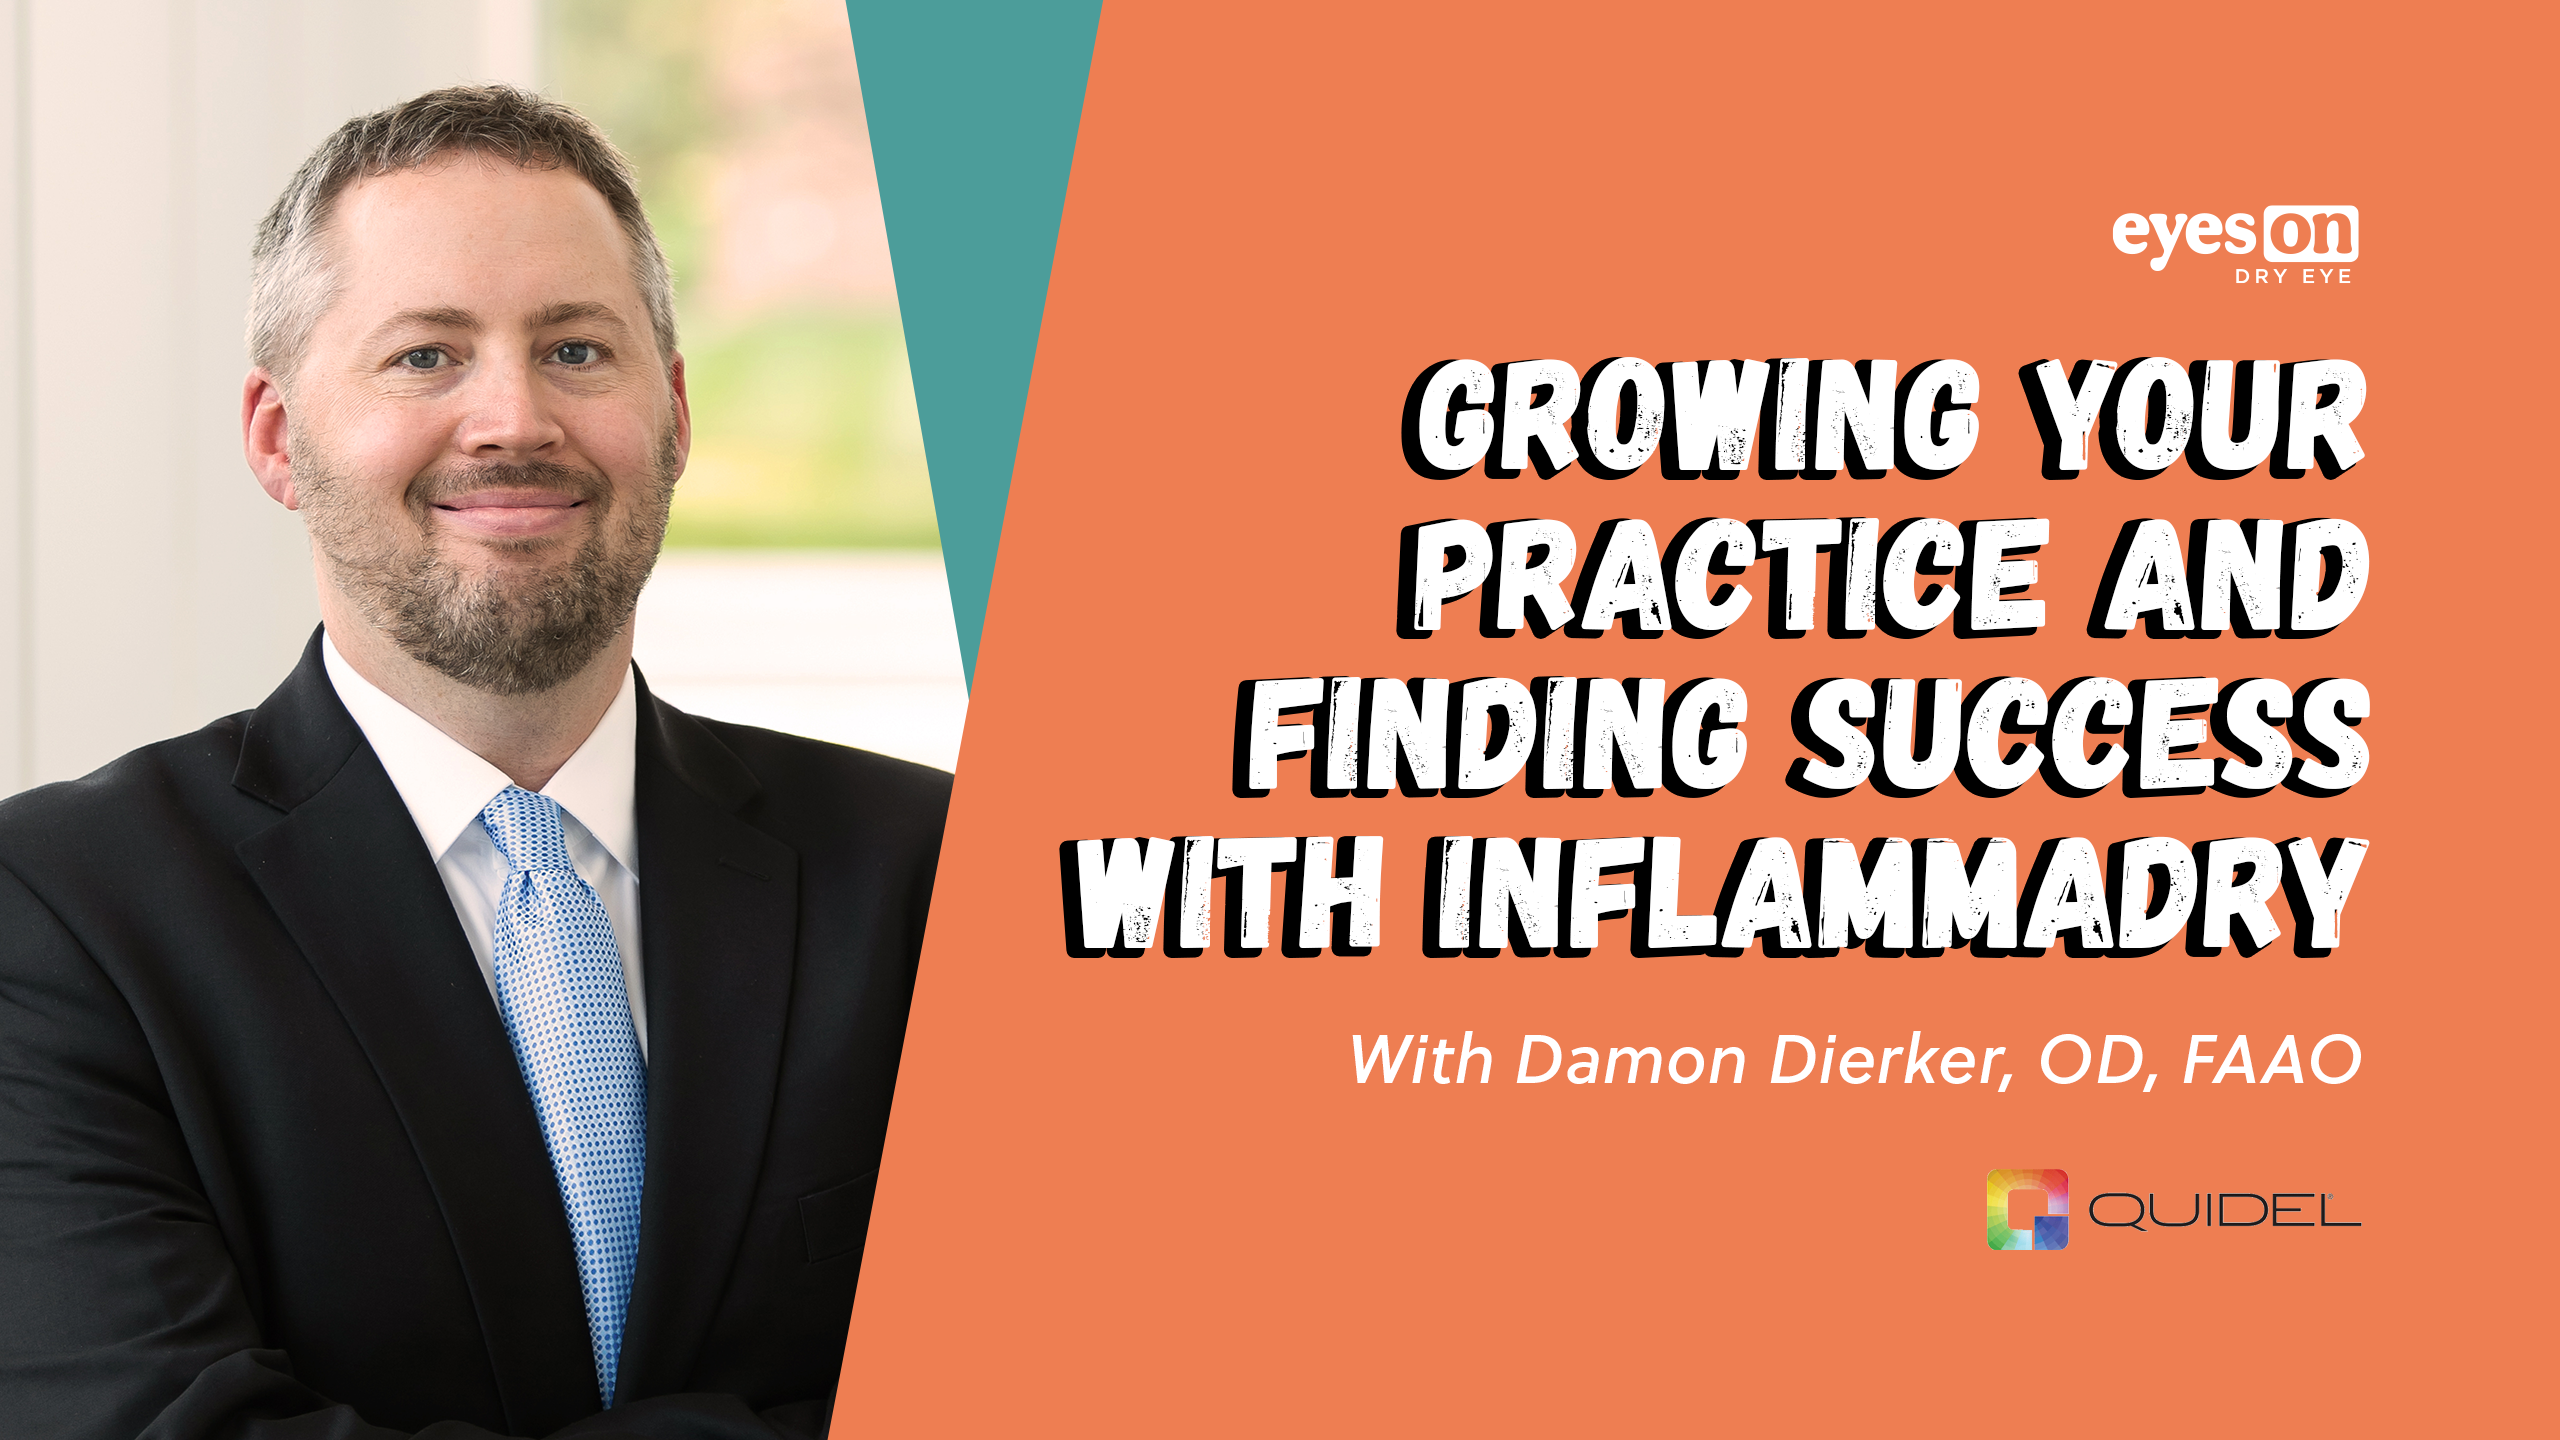 Live Discussion on InflammaDry With Dr. Damon Dierker